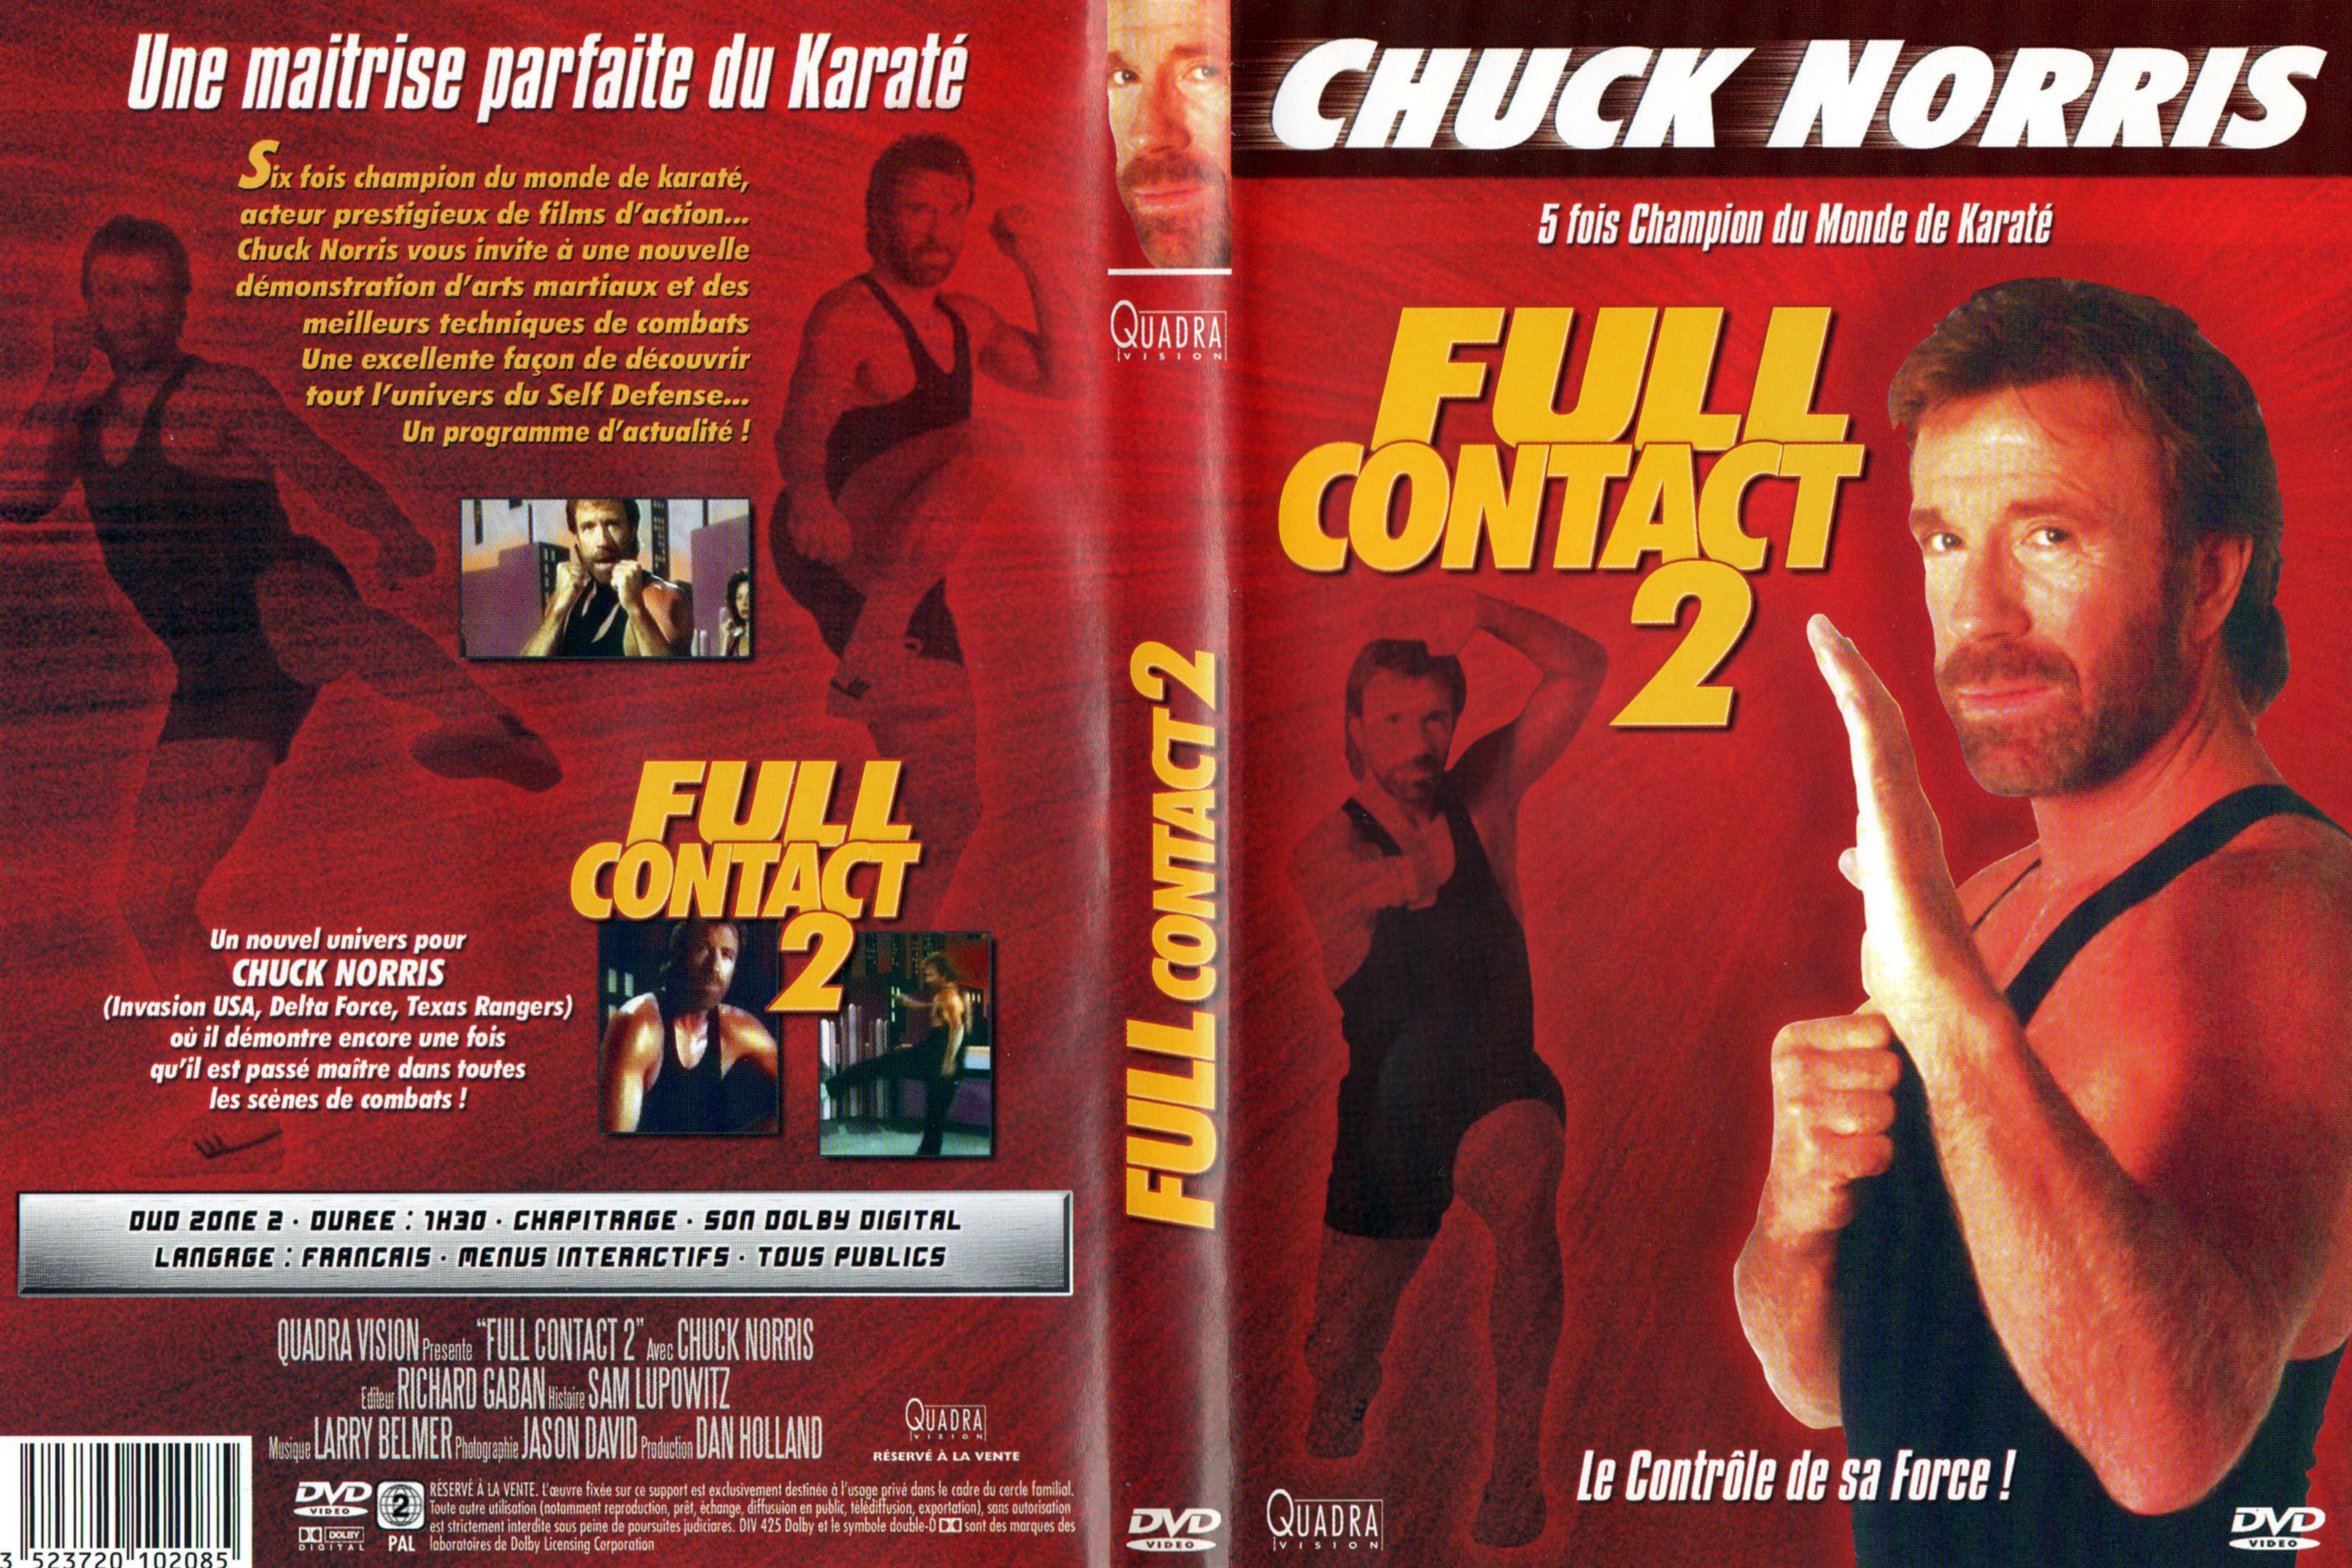 Jaquette DVD Full contact 2 (chuck norris)